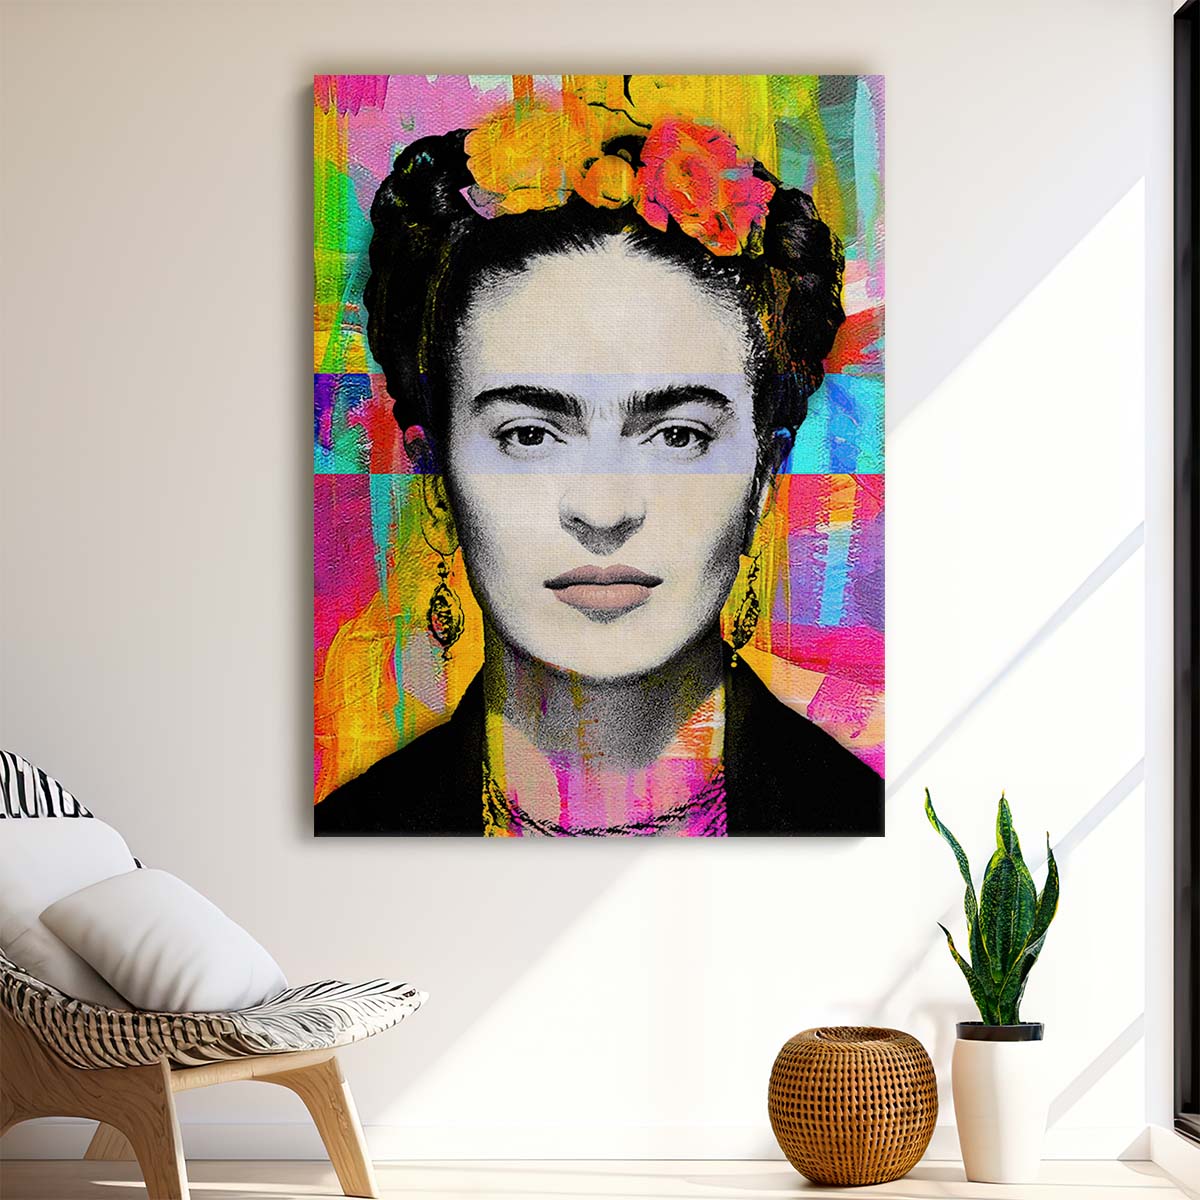 Frida Kahlo Portrait Wall Art by Luxuriance Designs. Made in USA.